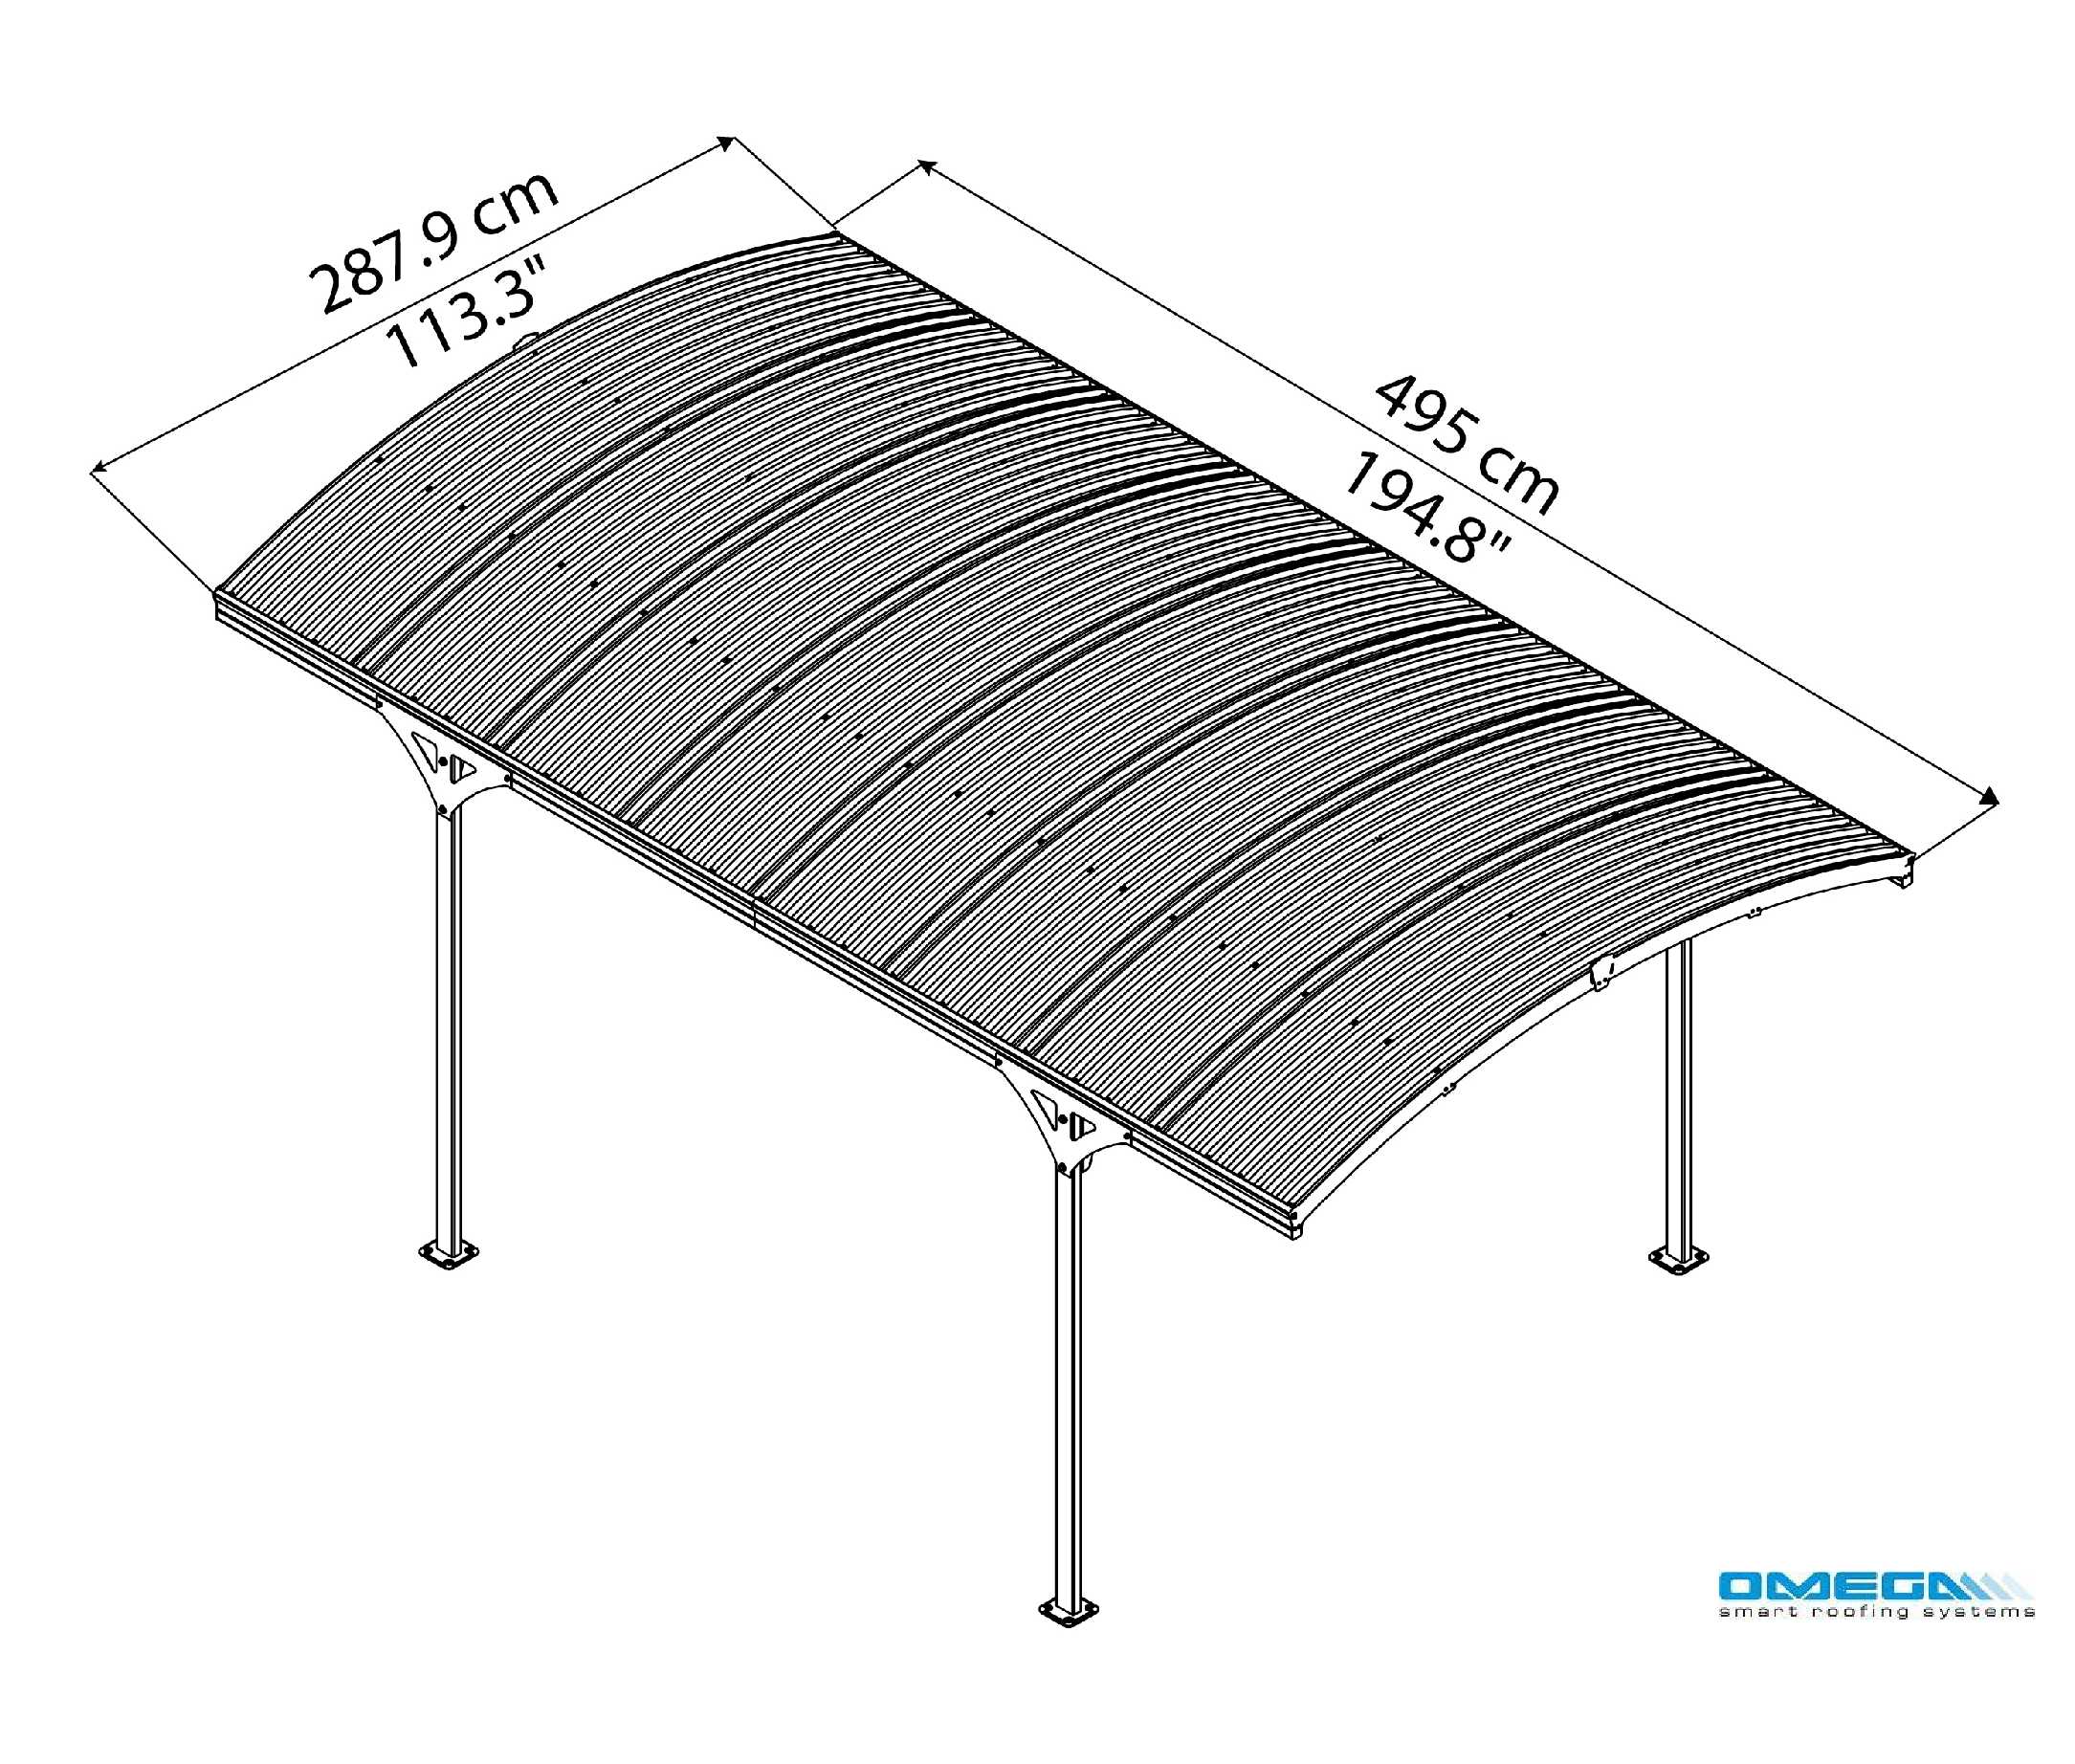 Atlas 5000 Curved Freestanding Canopy 4950 x 2879mm from Omega Build